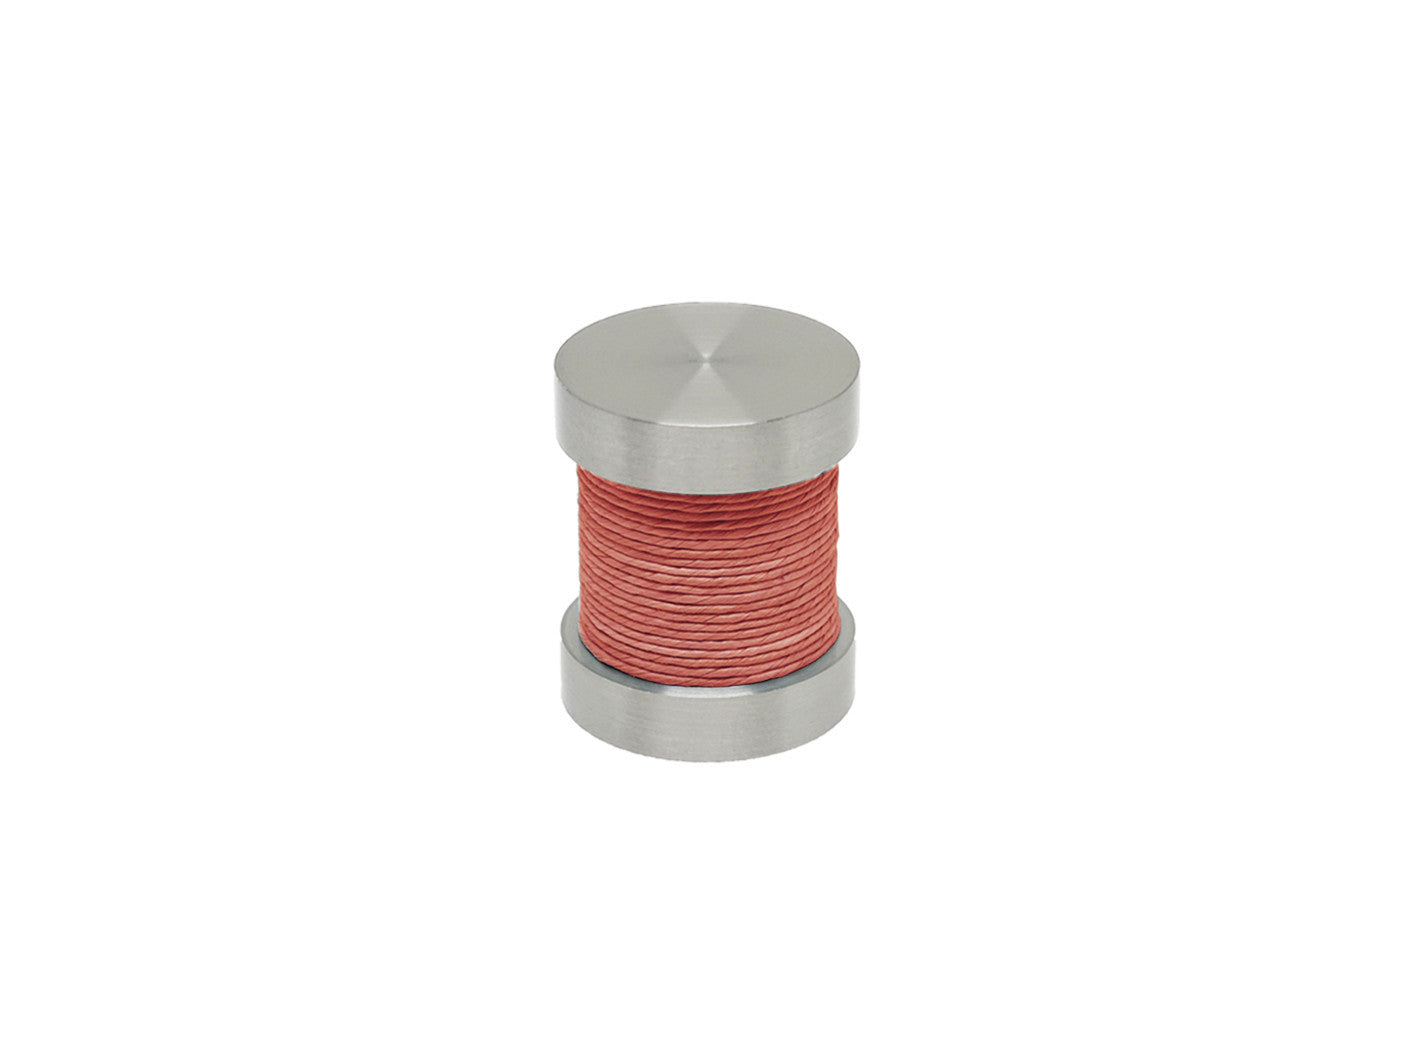 Coral pink coloured twine groove finial | Walcot House 30mm stainless steel collection